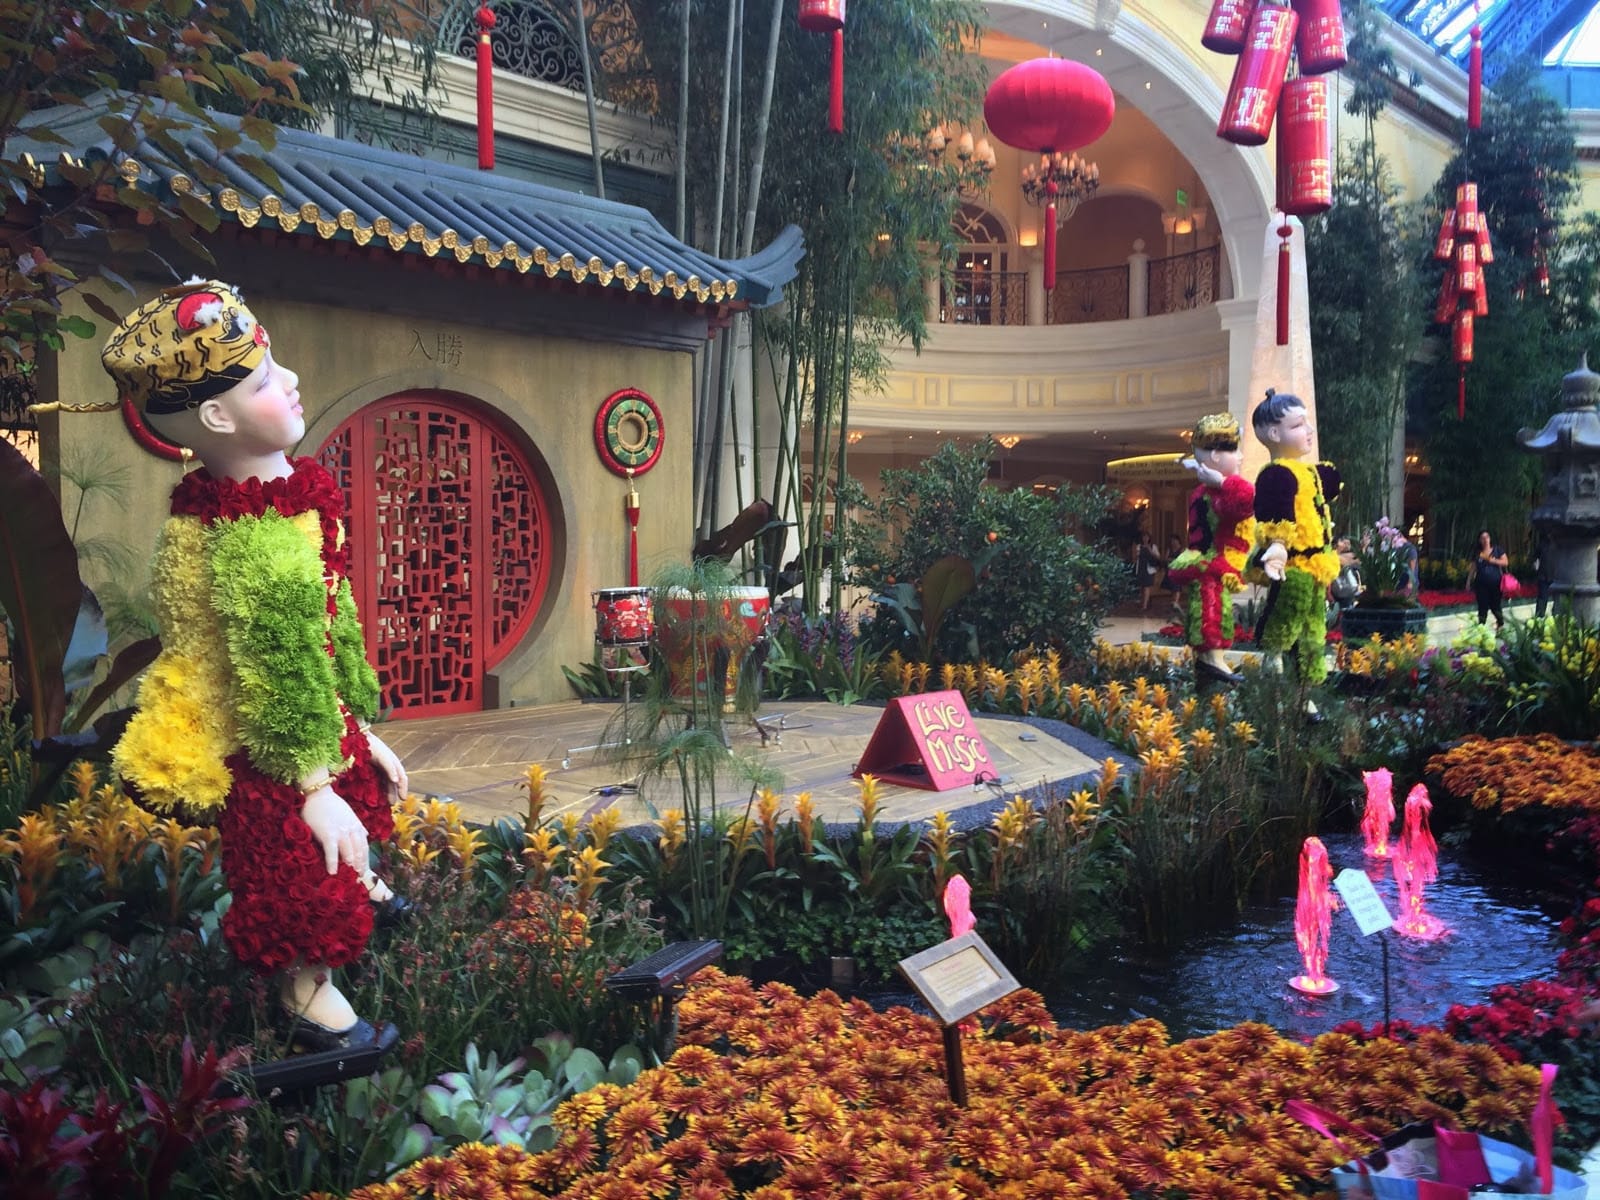 Las Vegas welcomes the Year of the Dog with Lunar New Year